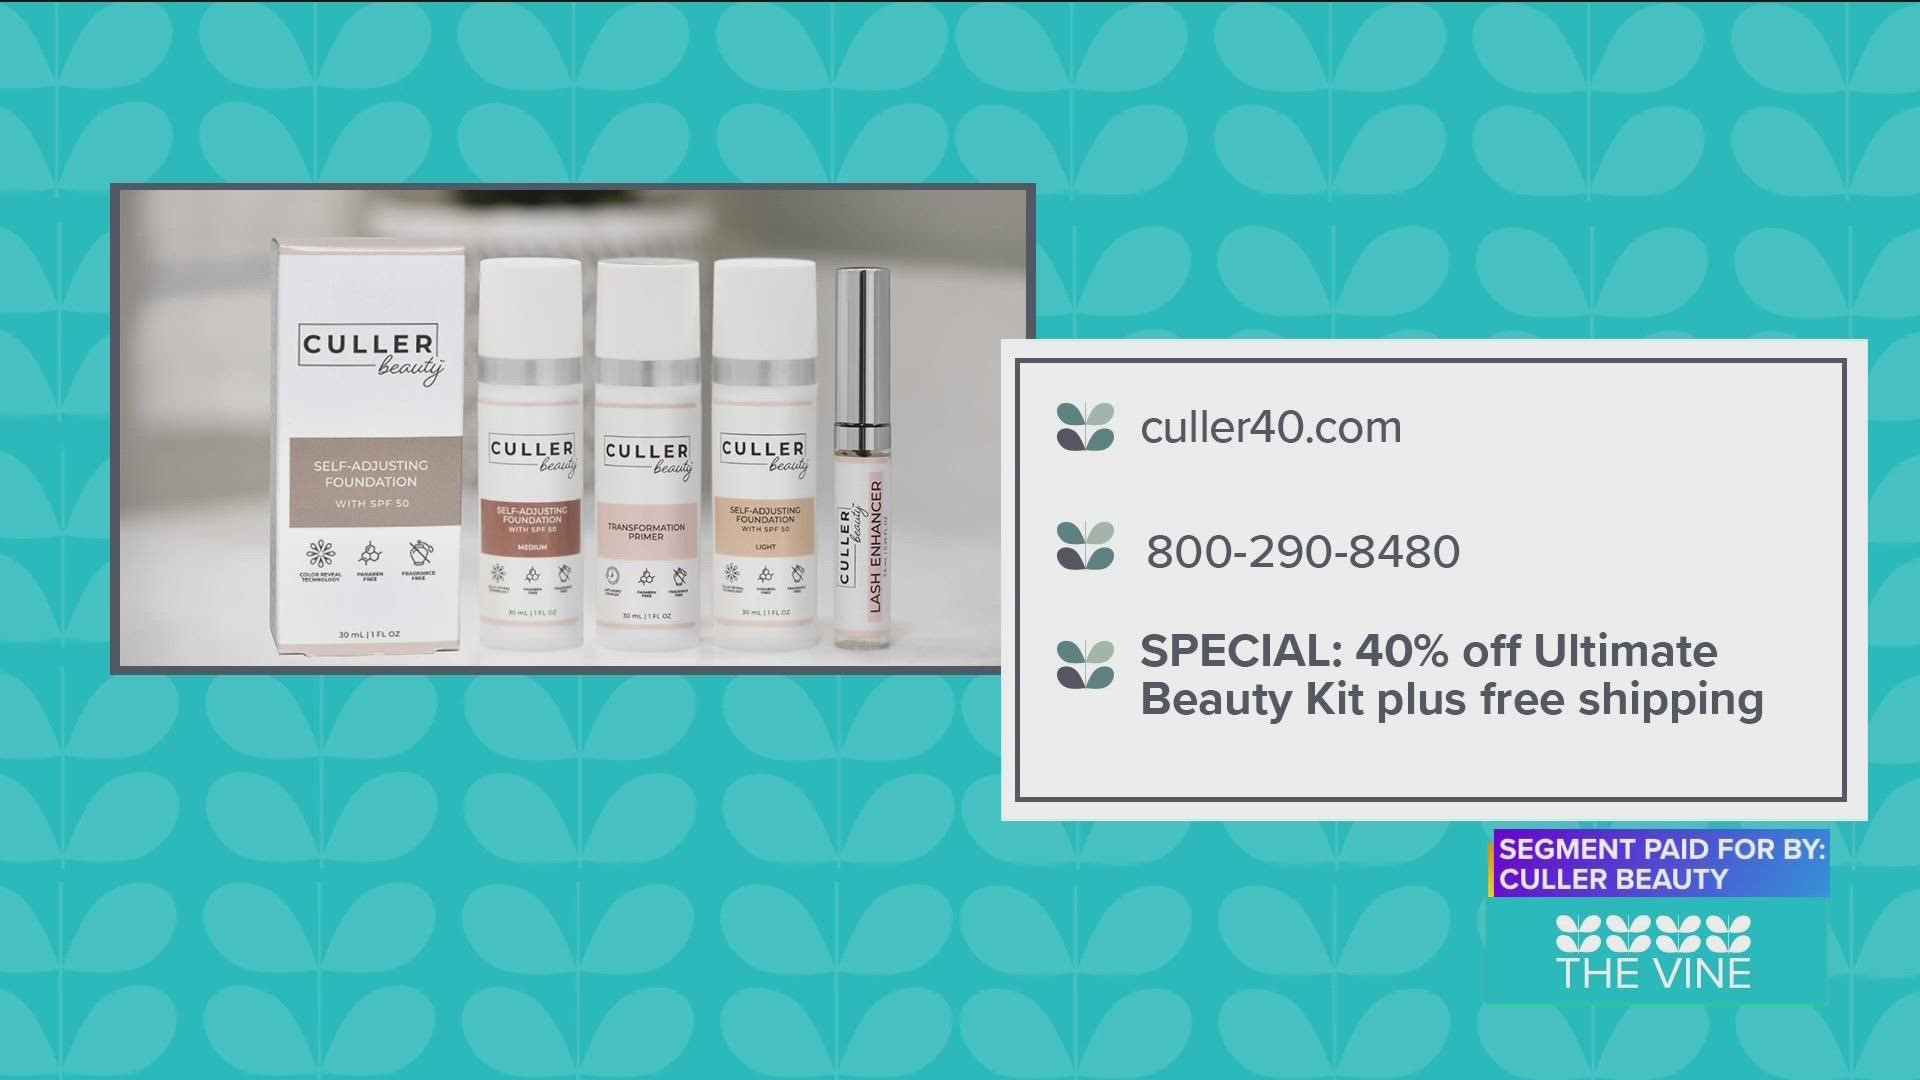 Head to culler40.com for 40% off Ultimate Beauty Kit!